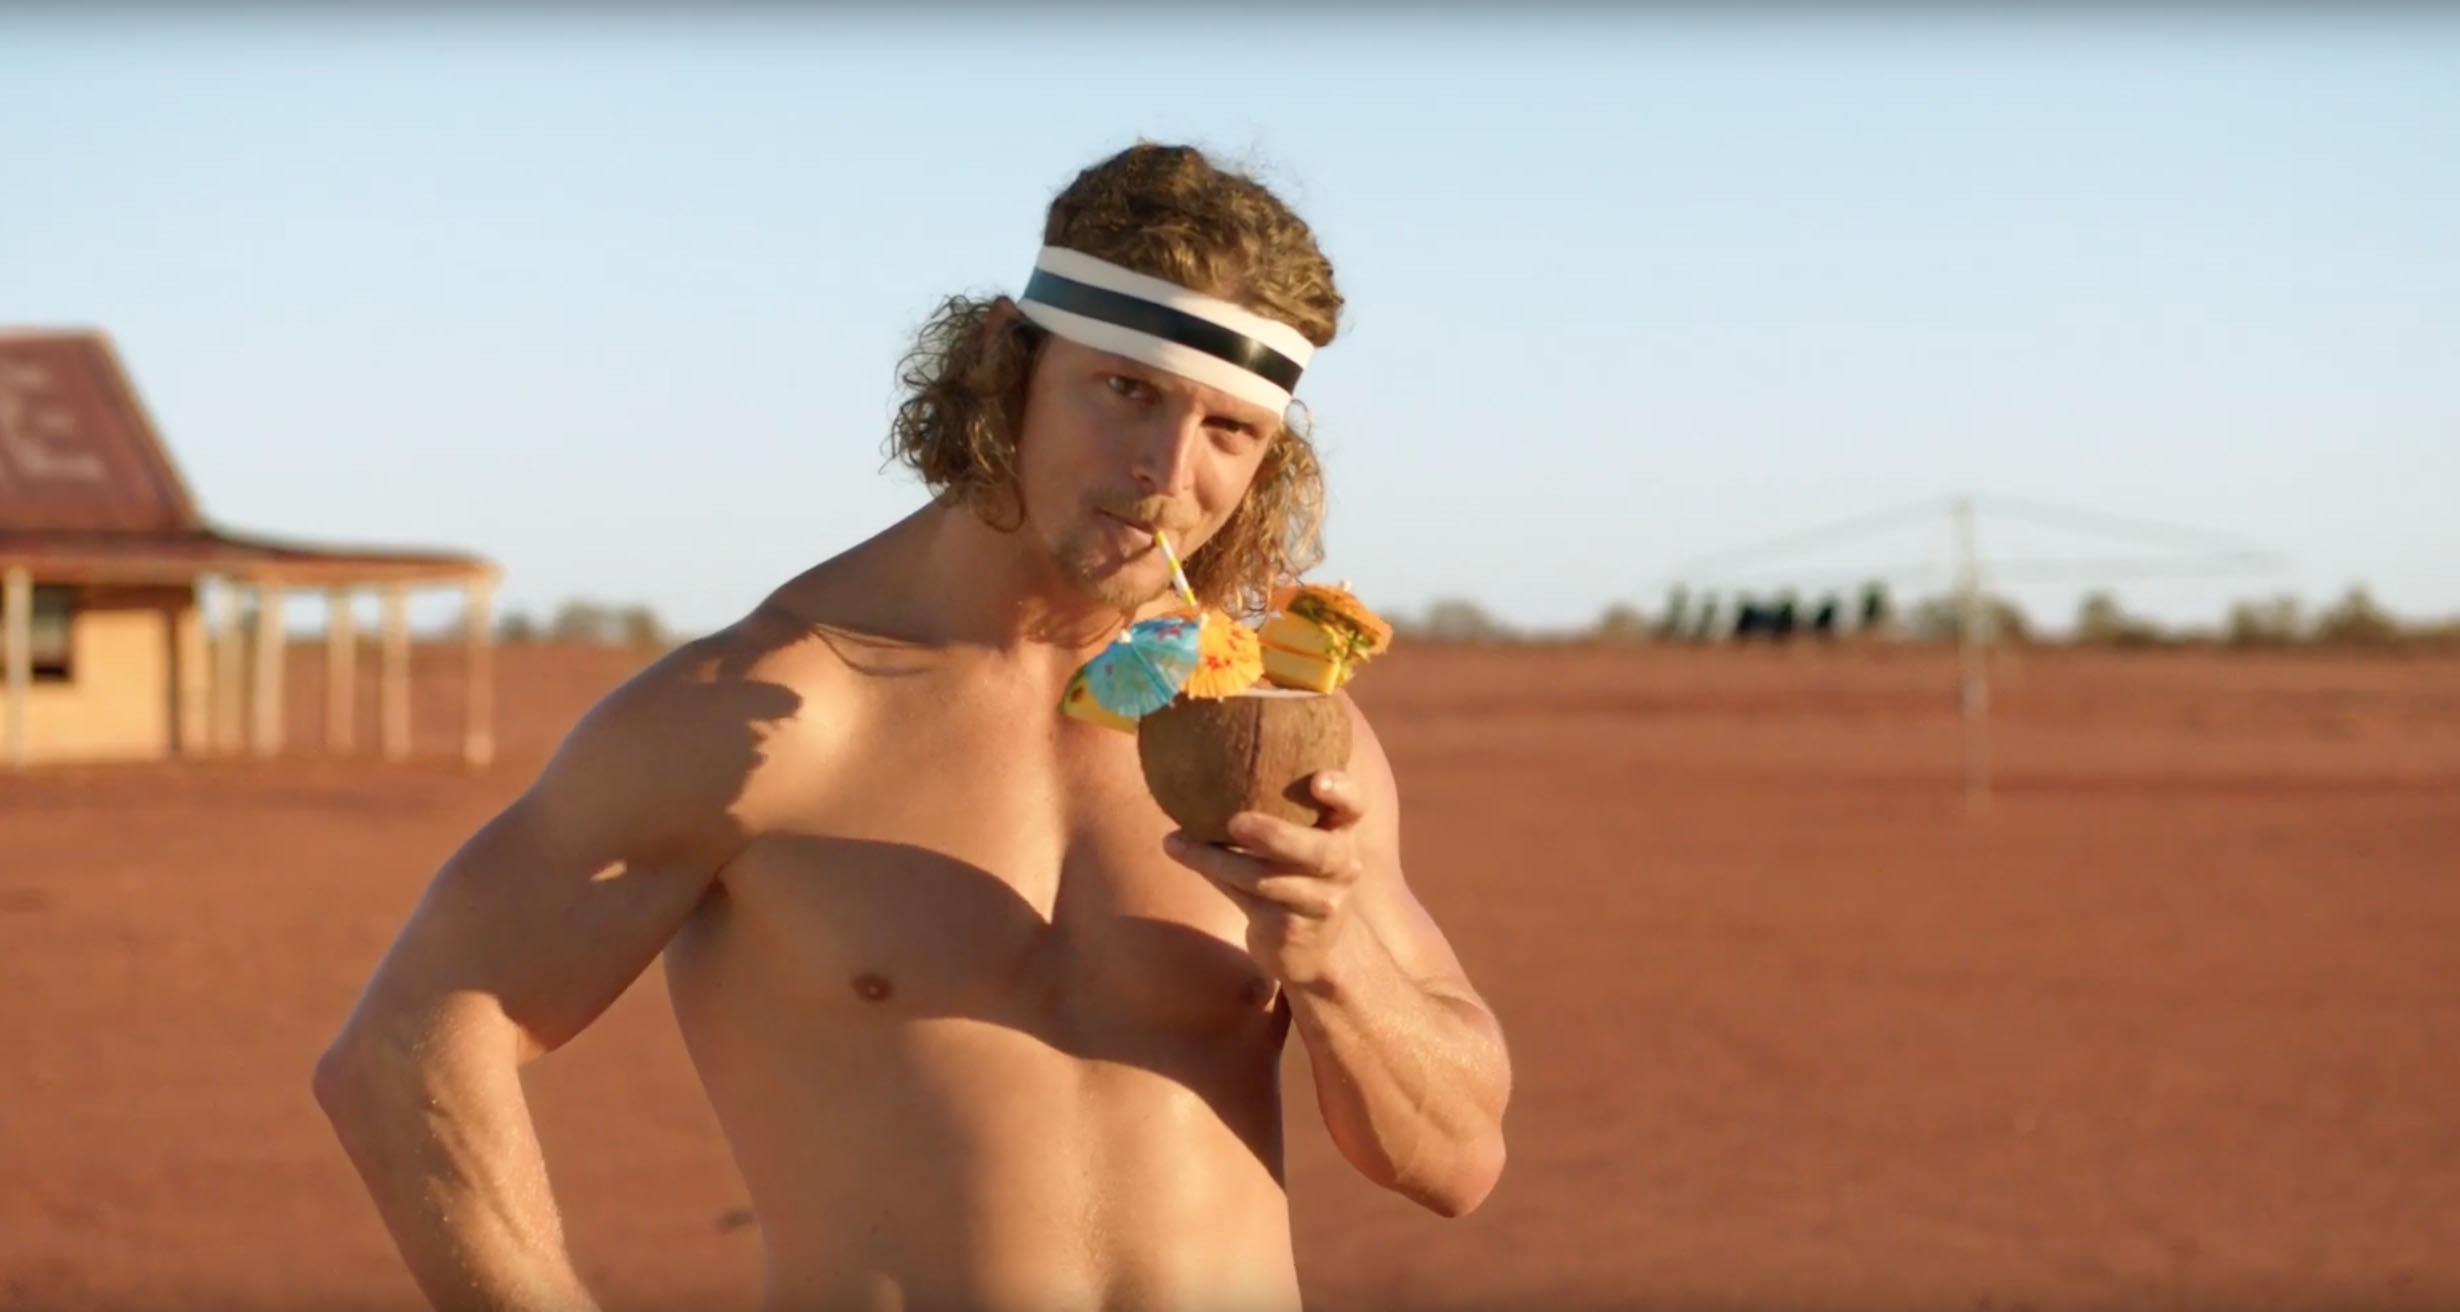 Nick 'Honey Badger' Cummins promotes Tradie's 'No bounce pouch' underwear